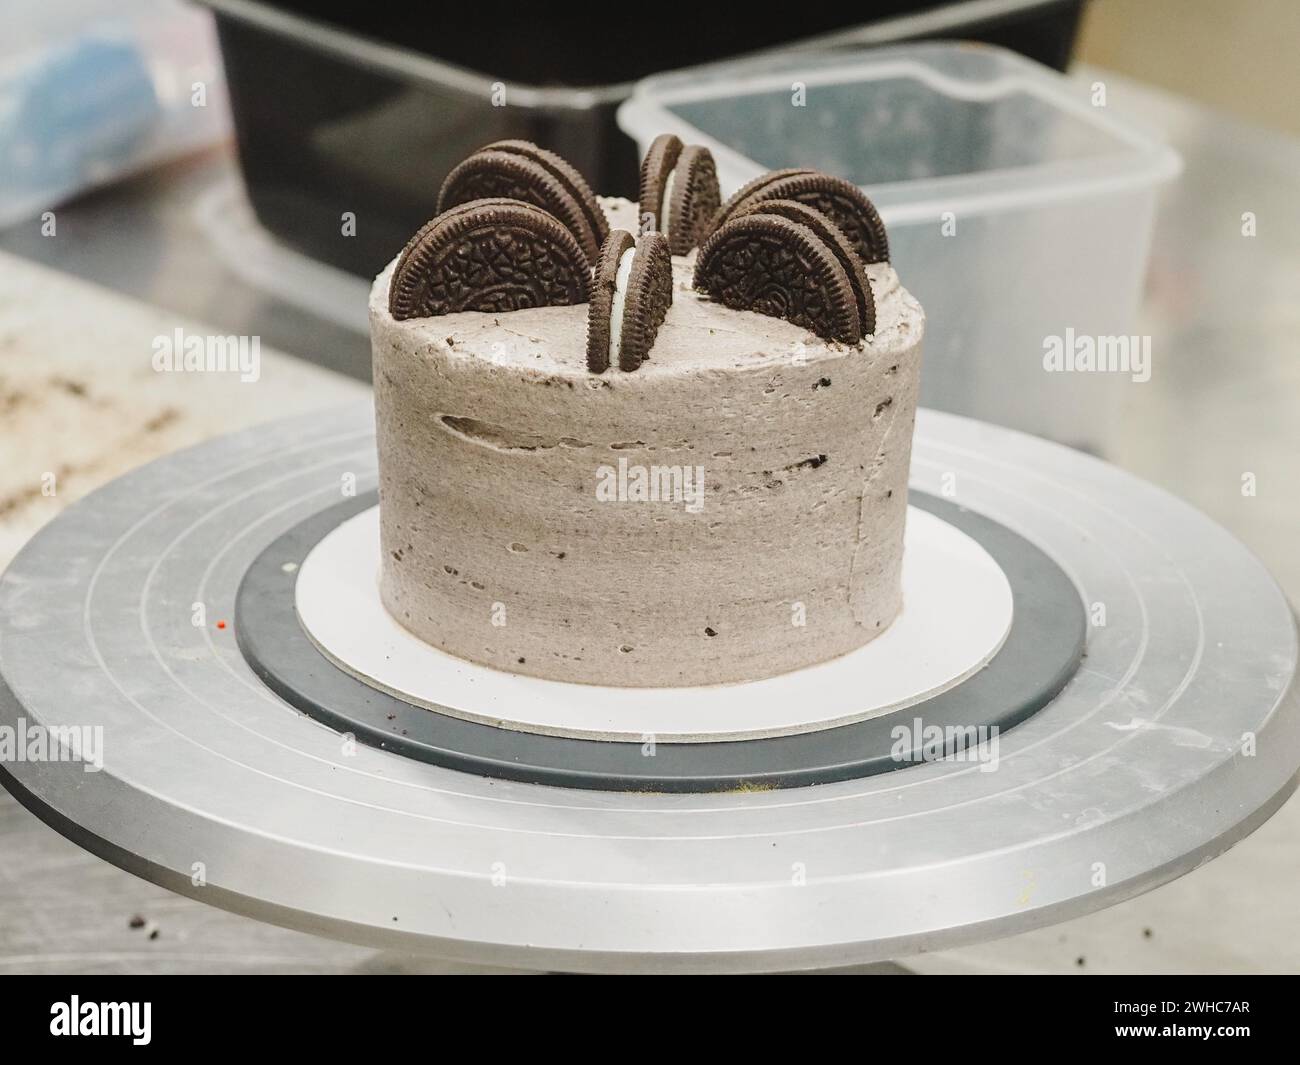 Dark chocolate cookies topping a cream cake with whole Oreos on top, on a kitchen turntable Stock Photo